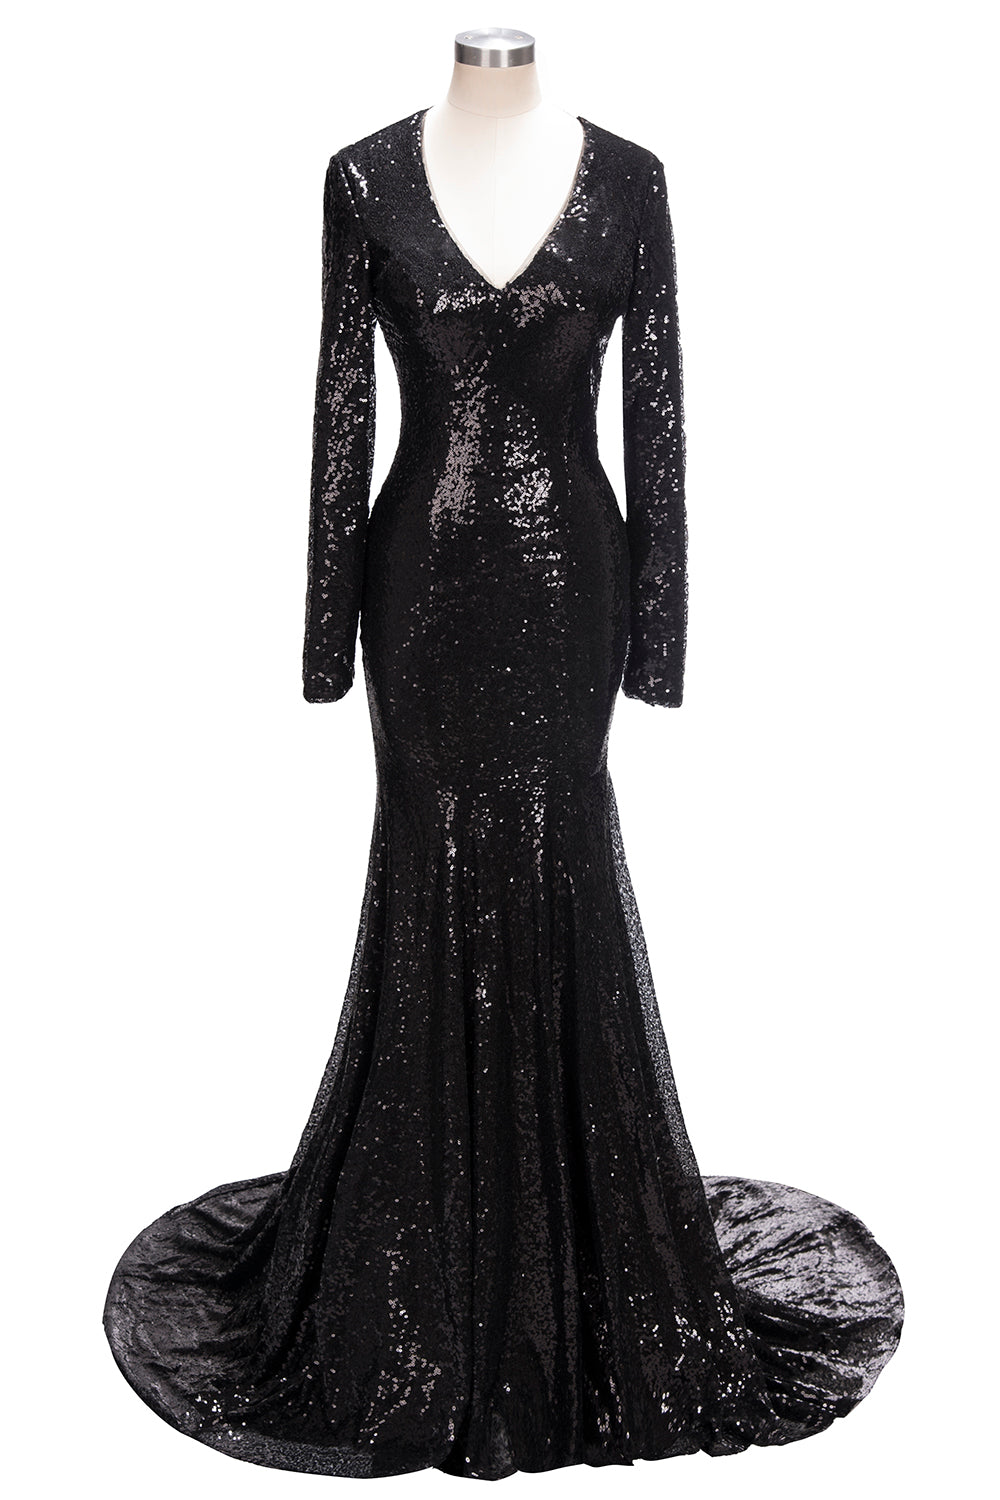 Long Mermaid V-Neck Black Sequins Corset Prom Dresses with Sleeves Gowns, Party Dress Over 67